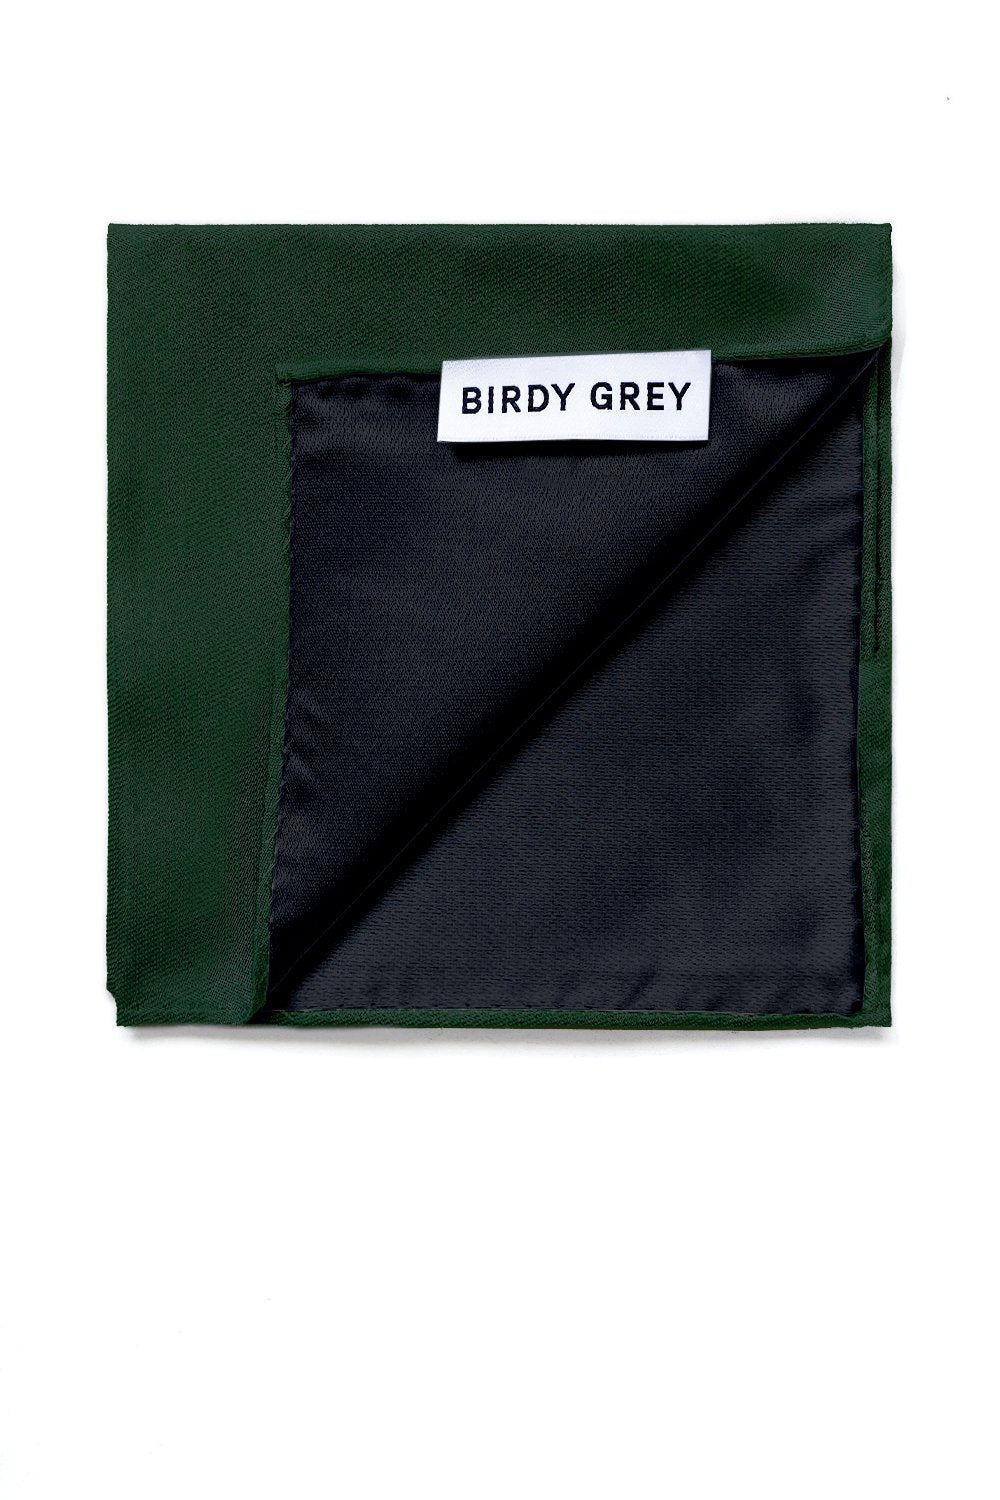 Didi Pocket Square in emerald green by Birdy Grey, interior view